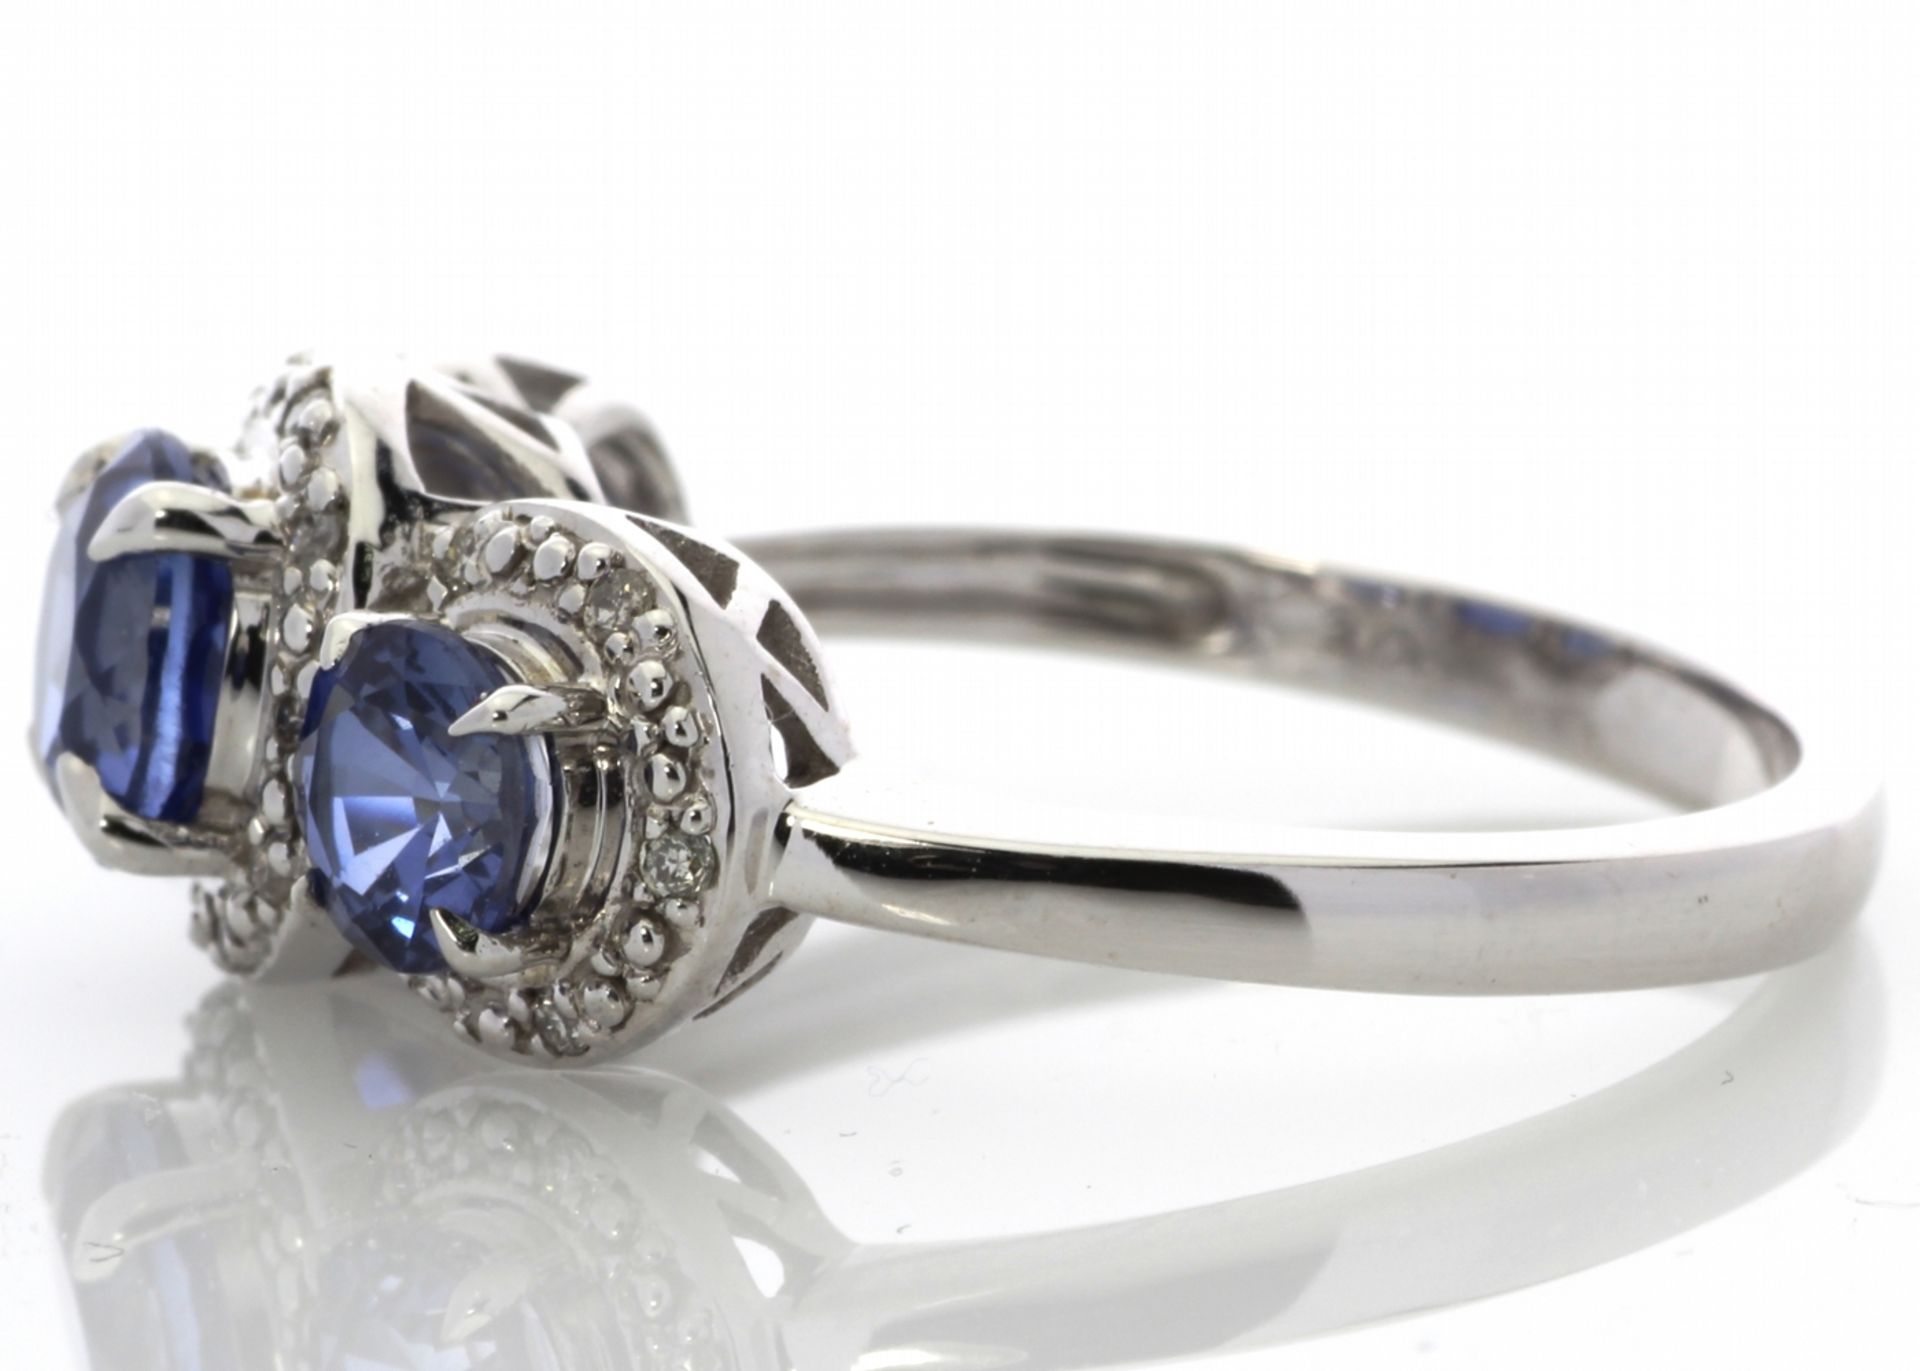 9ct White Gold Created Ceylon Sapphire And Diamond Ring (S2.21) 0.10 Carats - Valued By GIE £2,750. - Image 4 of 6